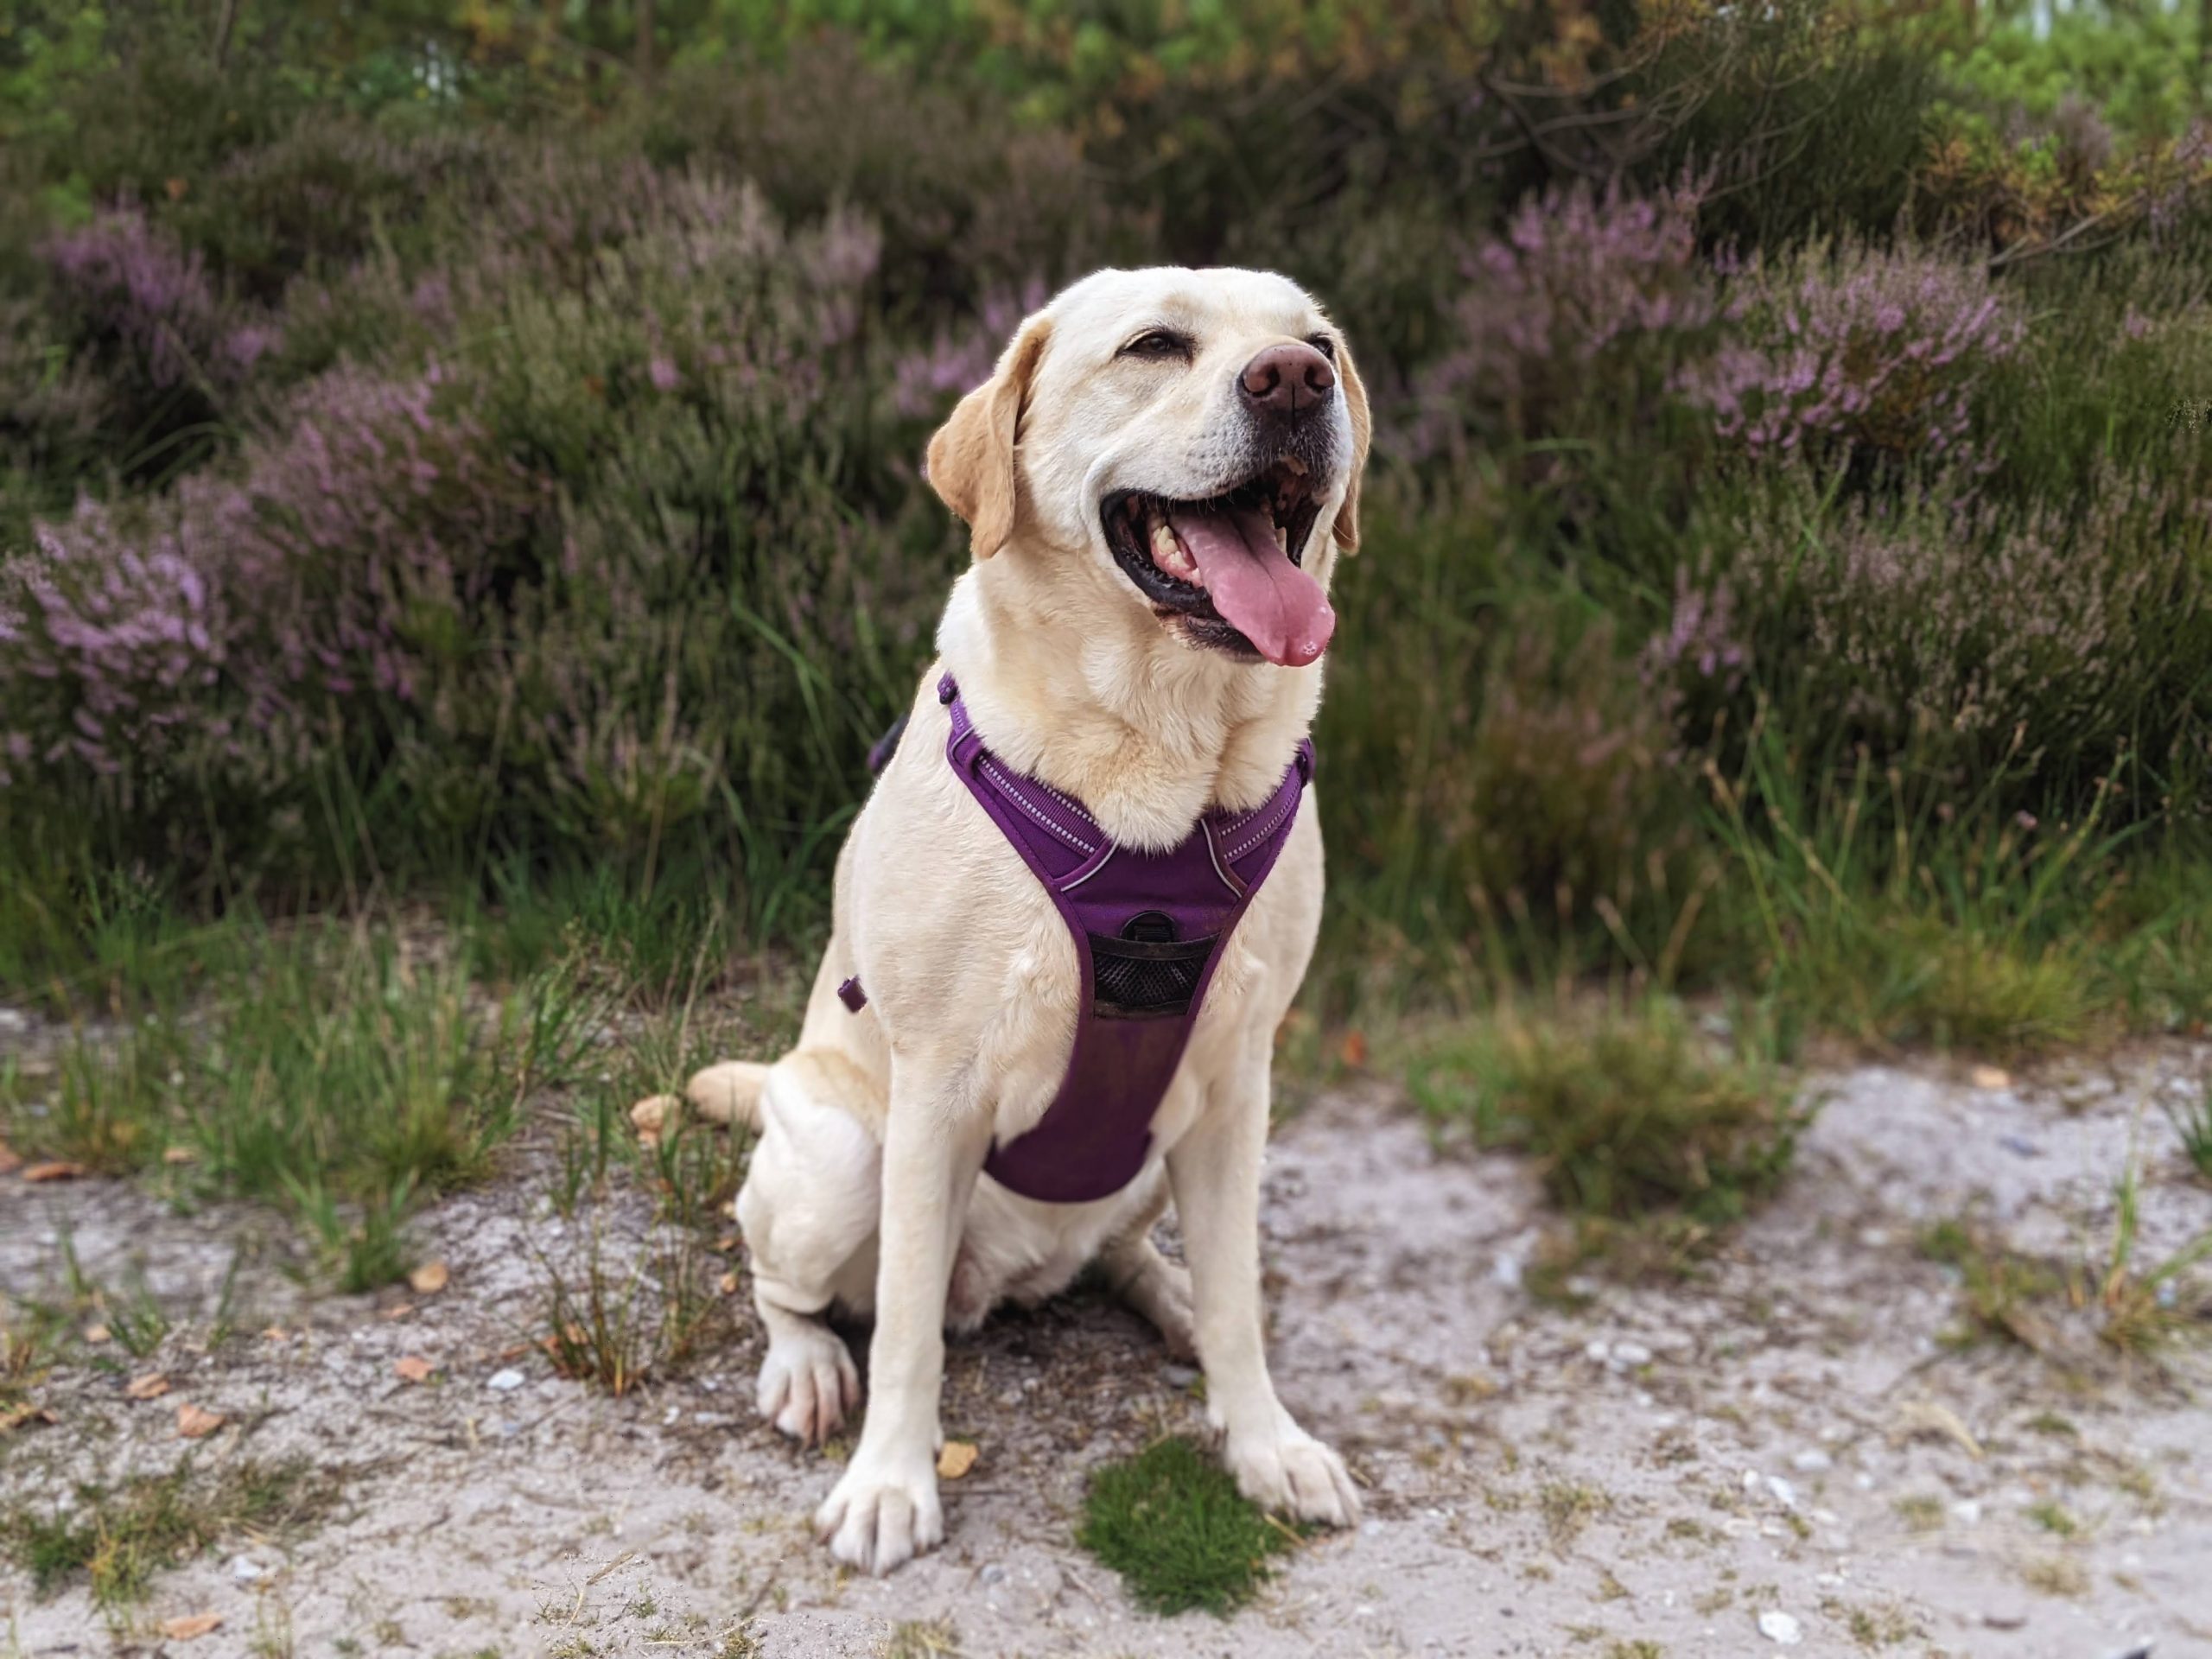 Labrador dog in purple harness sat in front of purple heather